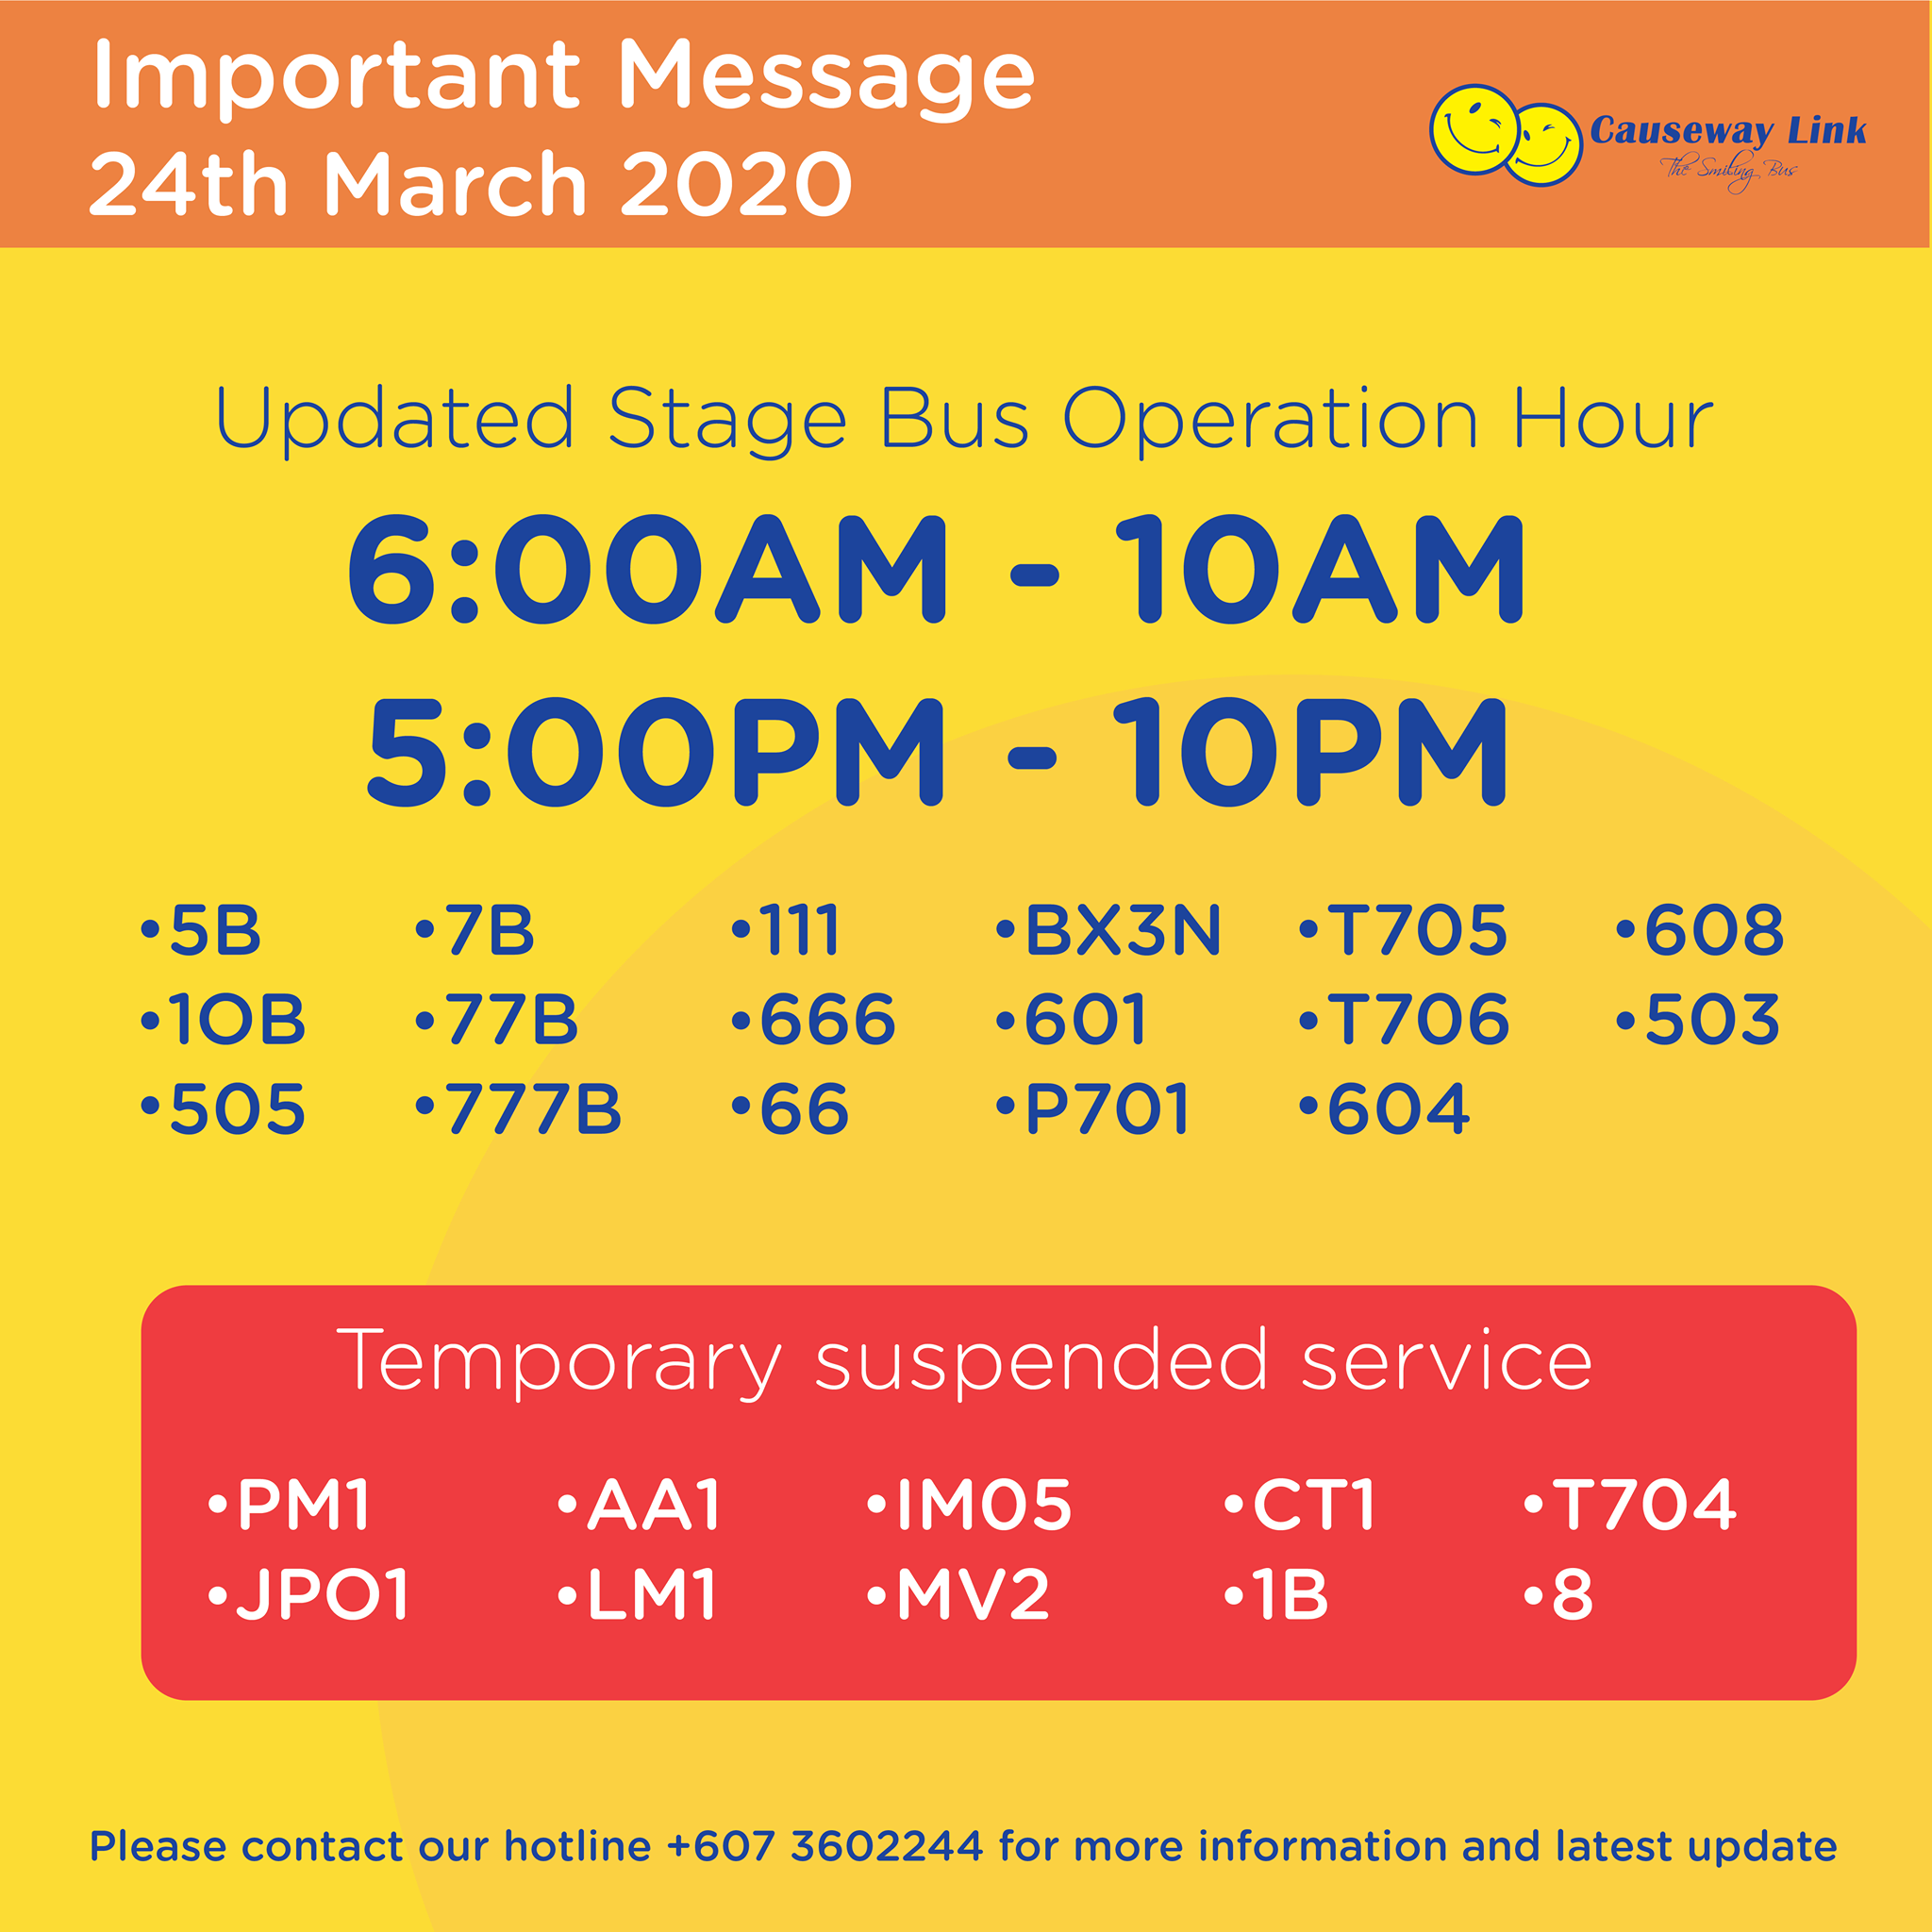 Official Causeway Link announcement on the change in operating hours and suspension of bus services.